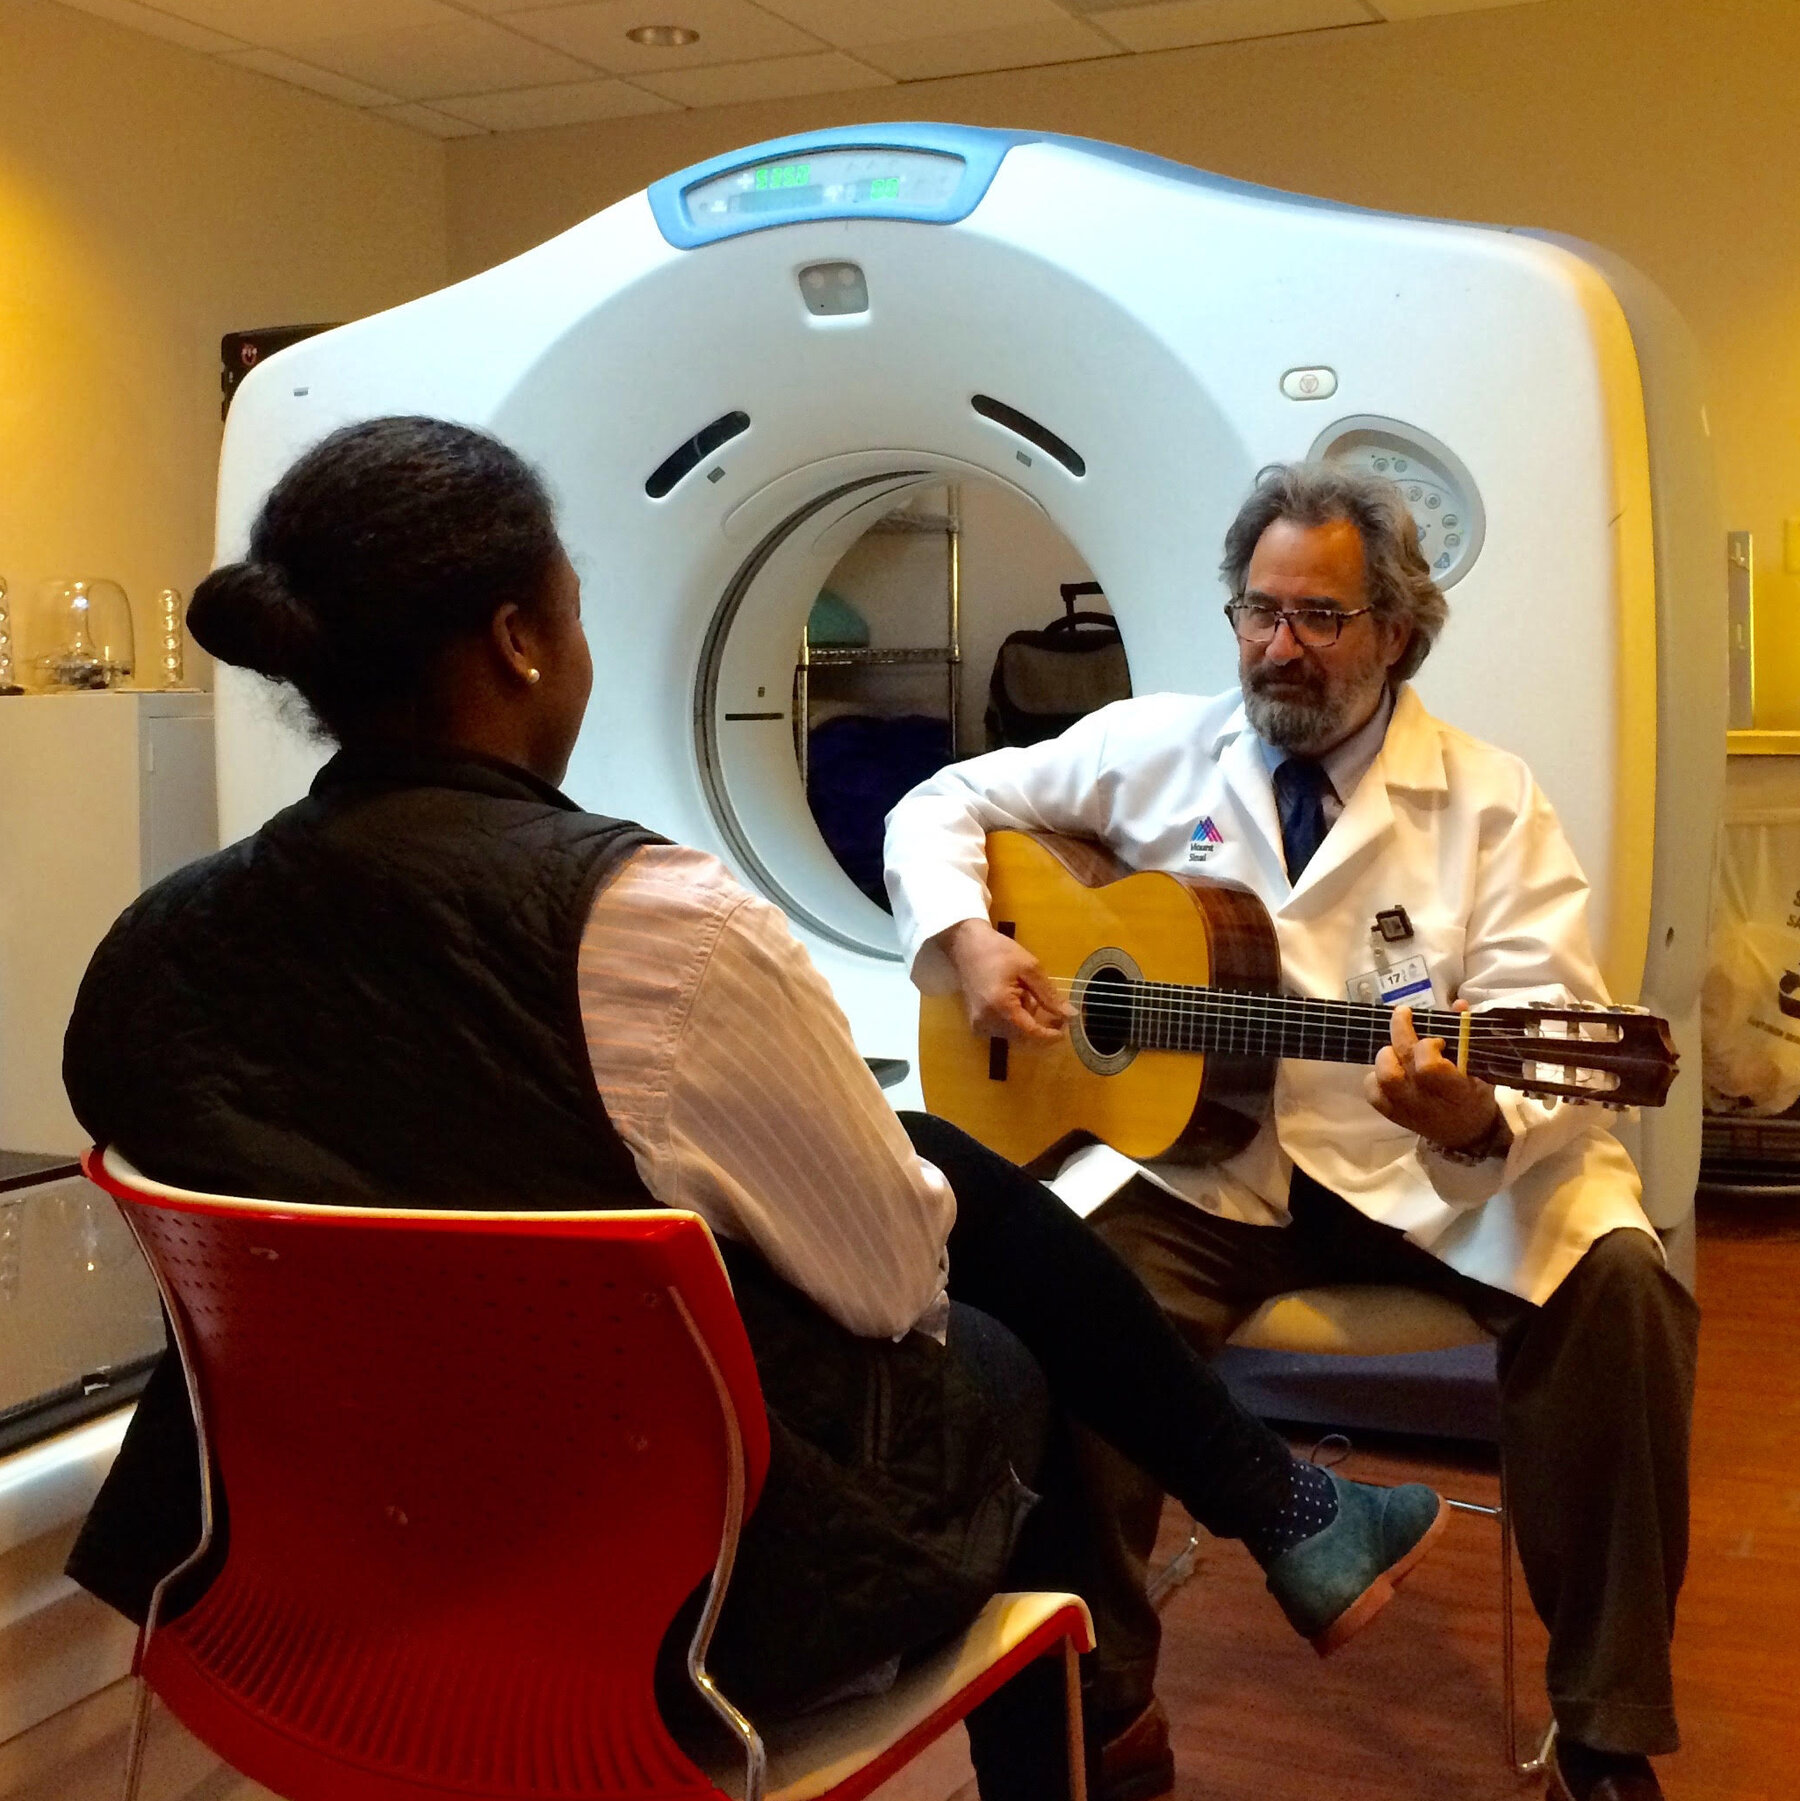 Music therapy experiences may include listening, singing, playing instruments, or composing music. Photo/Net